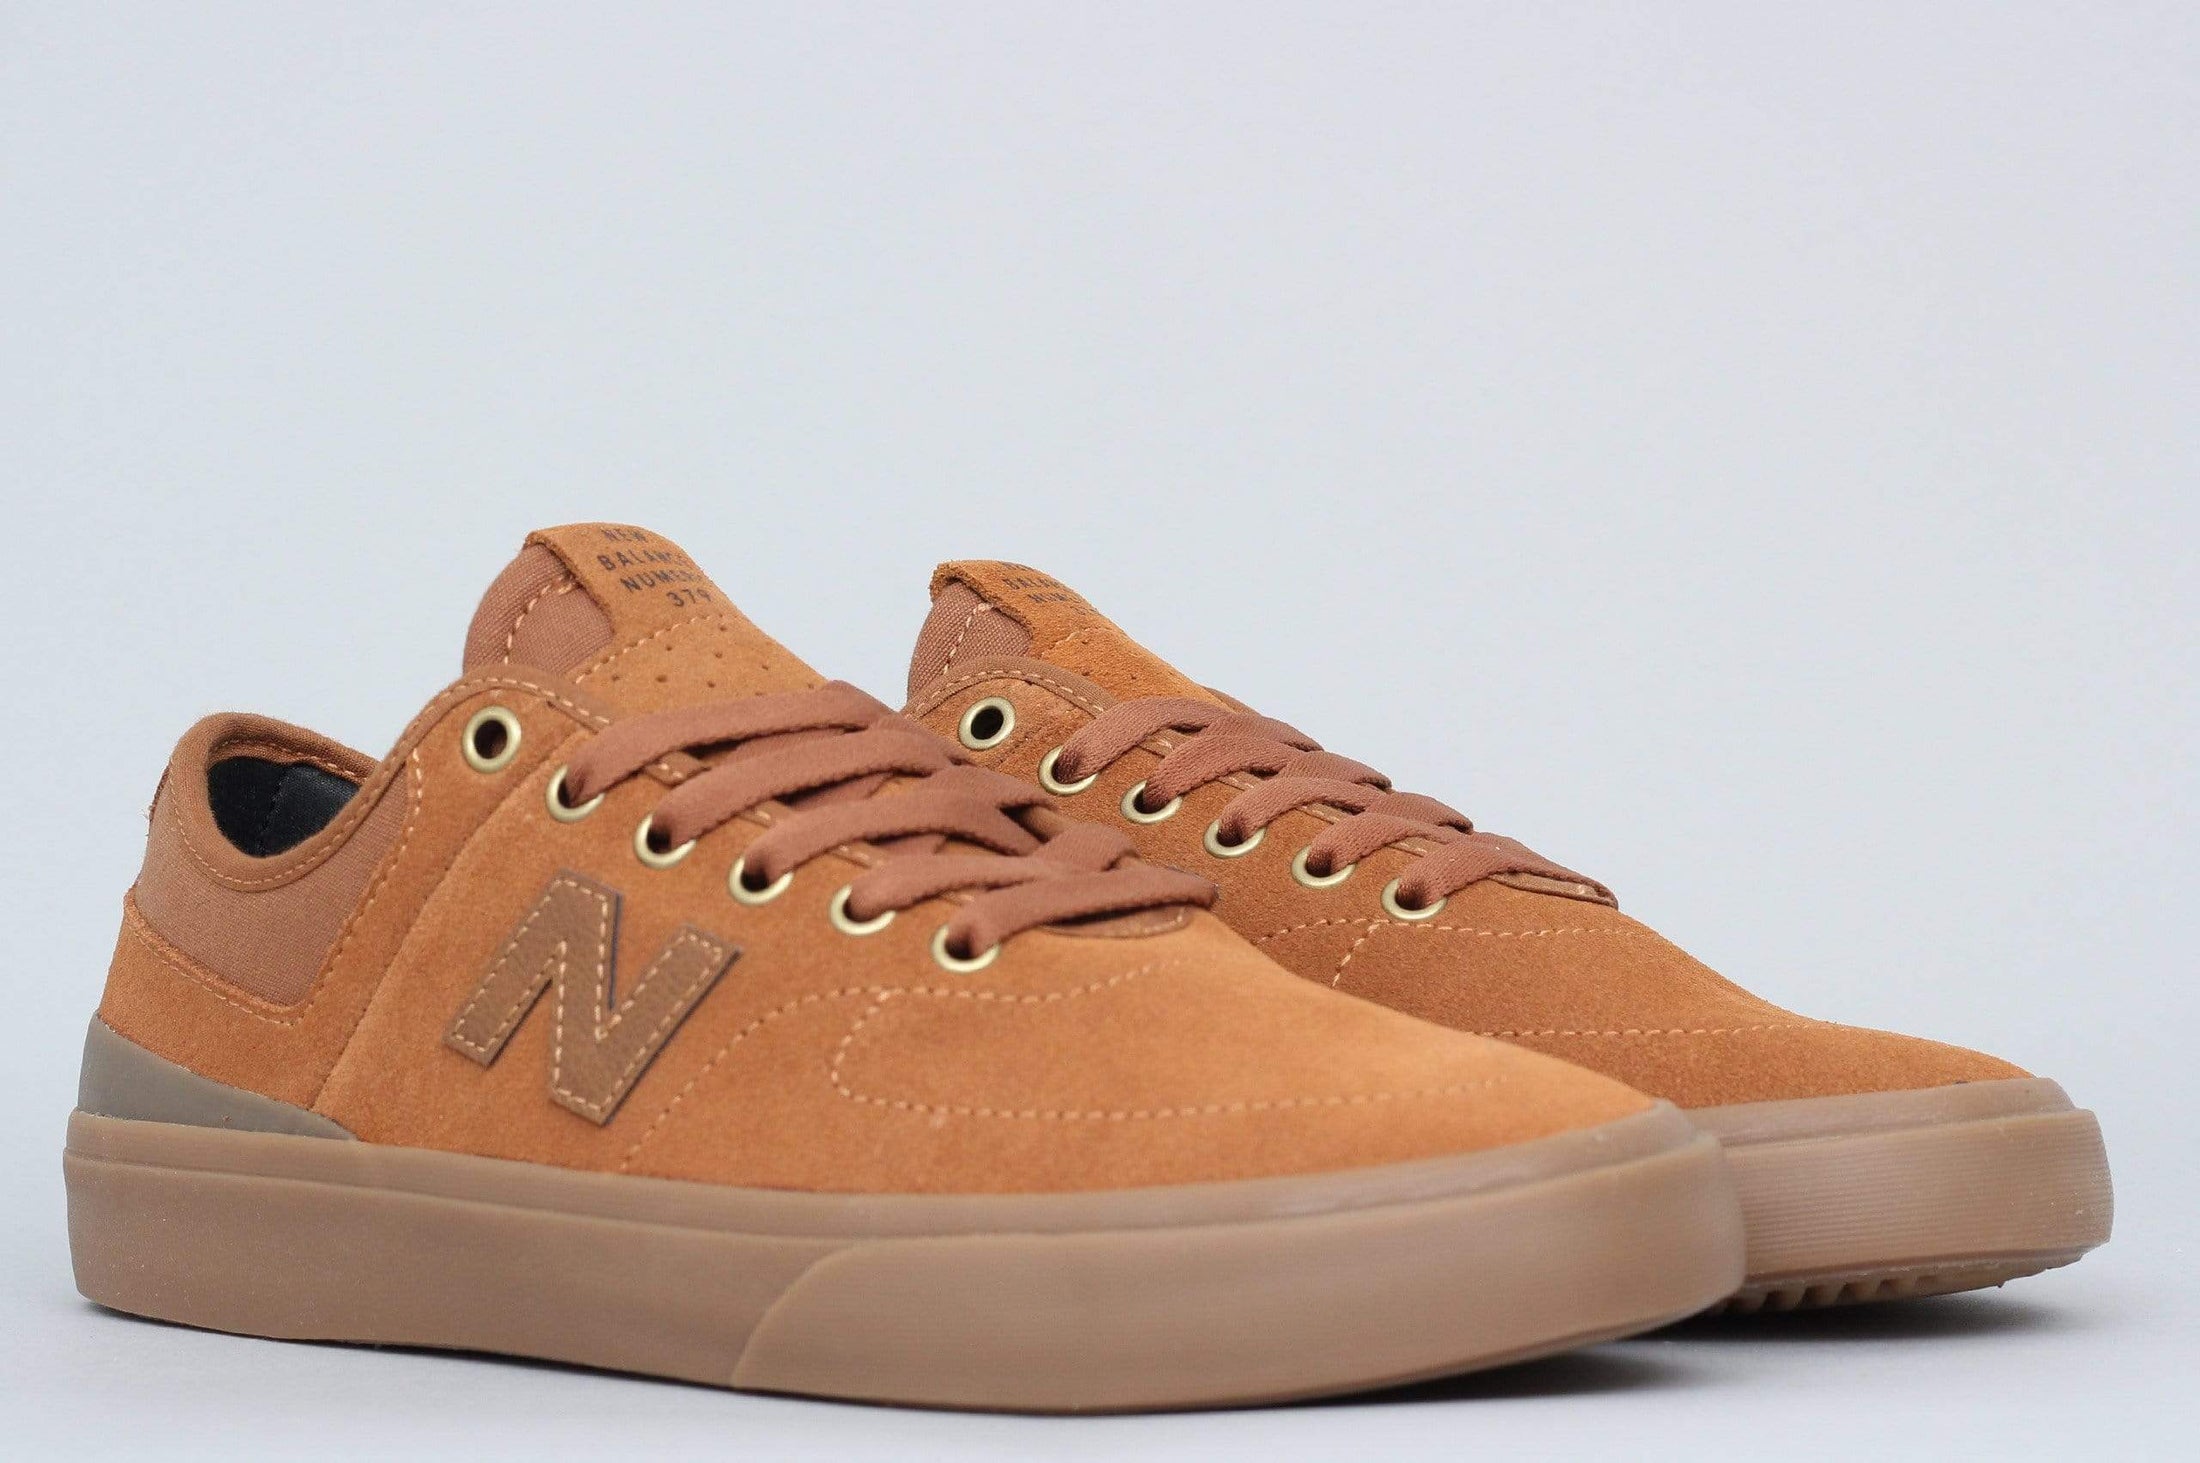 New Balance NM379 Shoes Brown / Gum - Jake Hayes